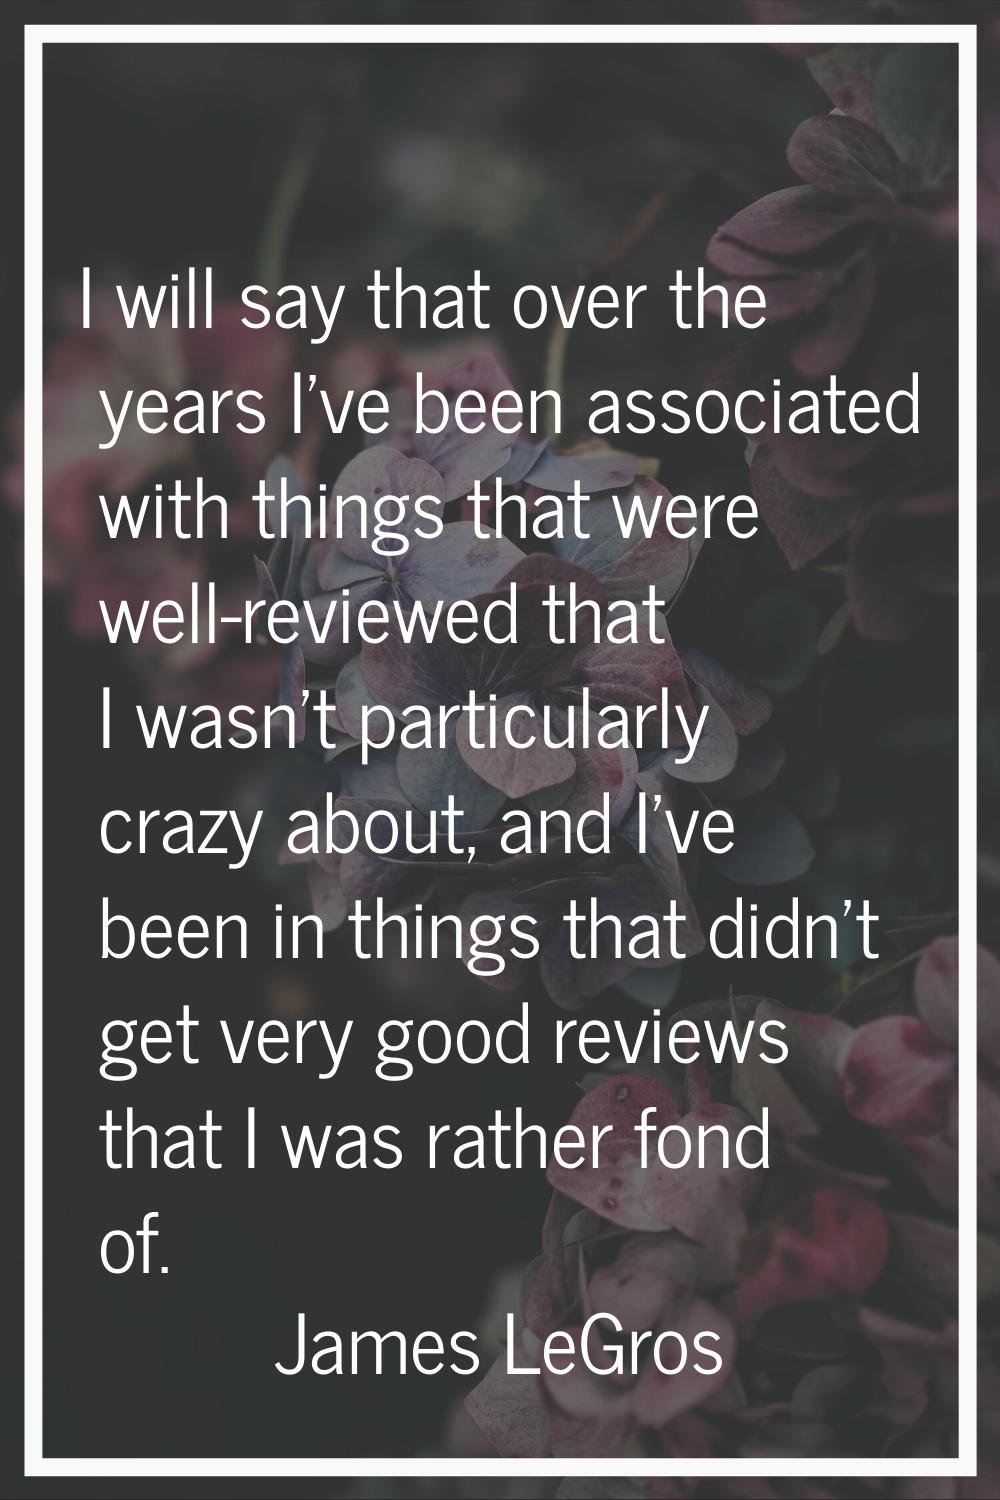 I will say that over the years I've been associated with things that were well-reviewed that I wasn